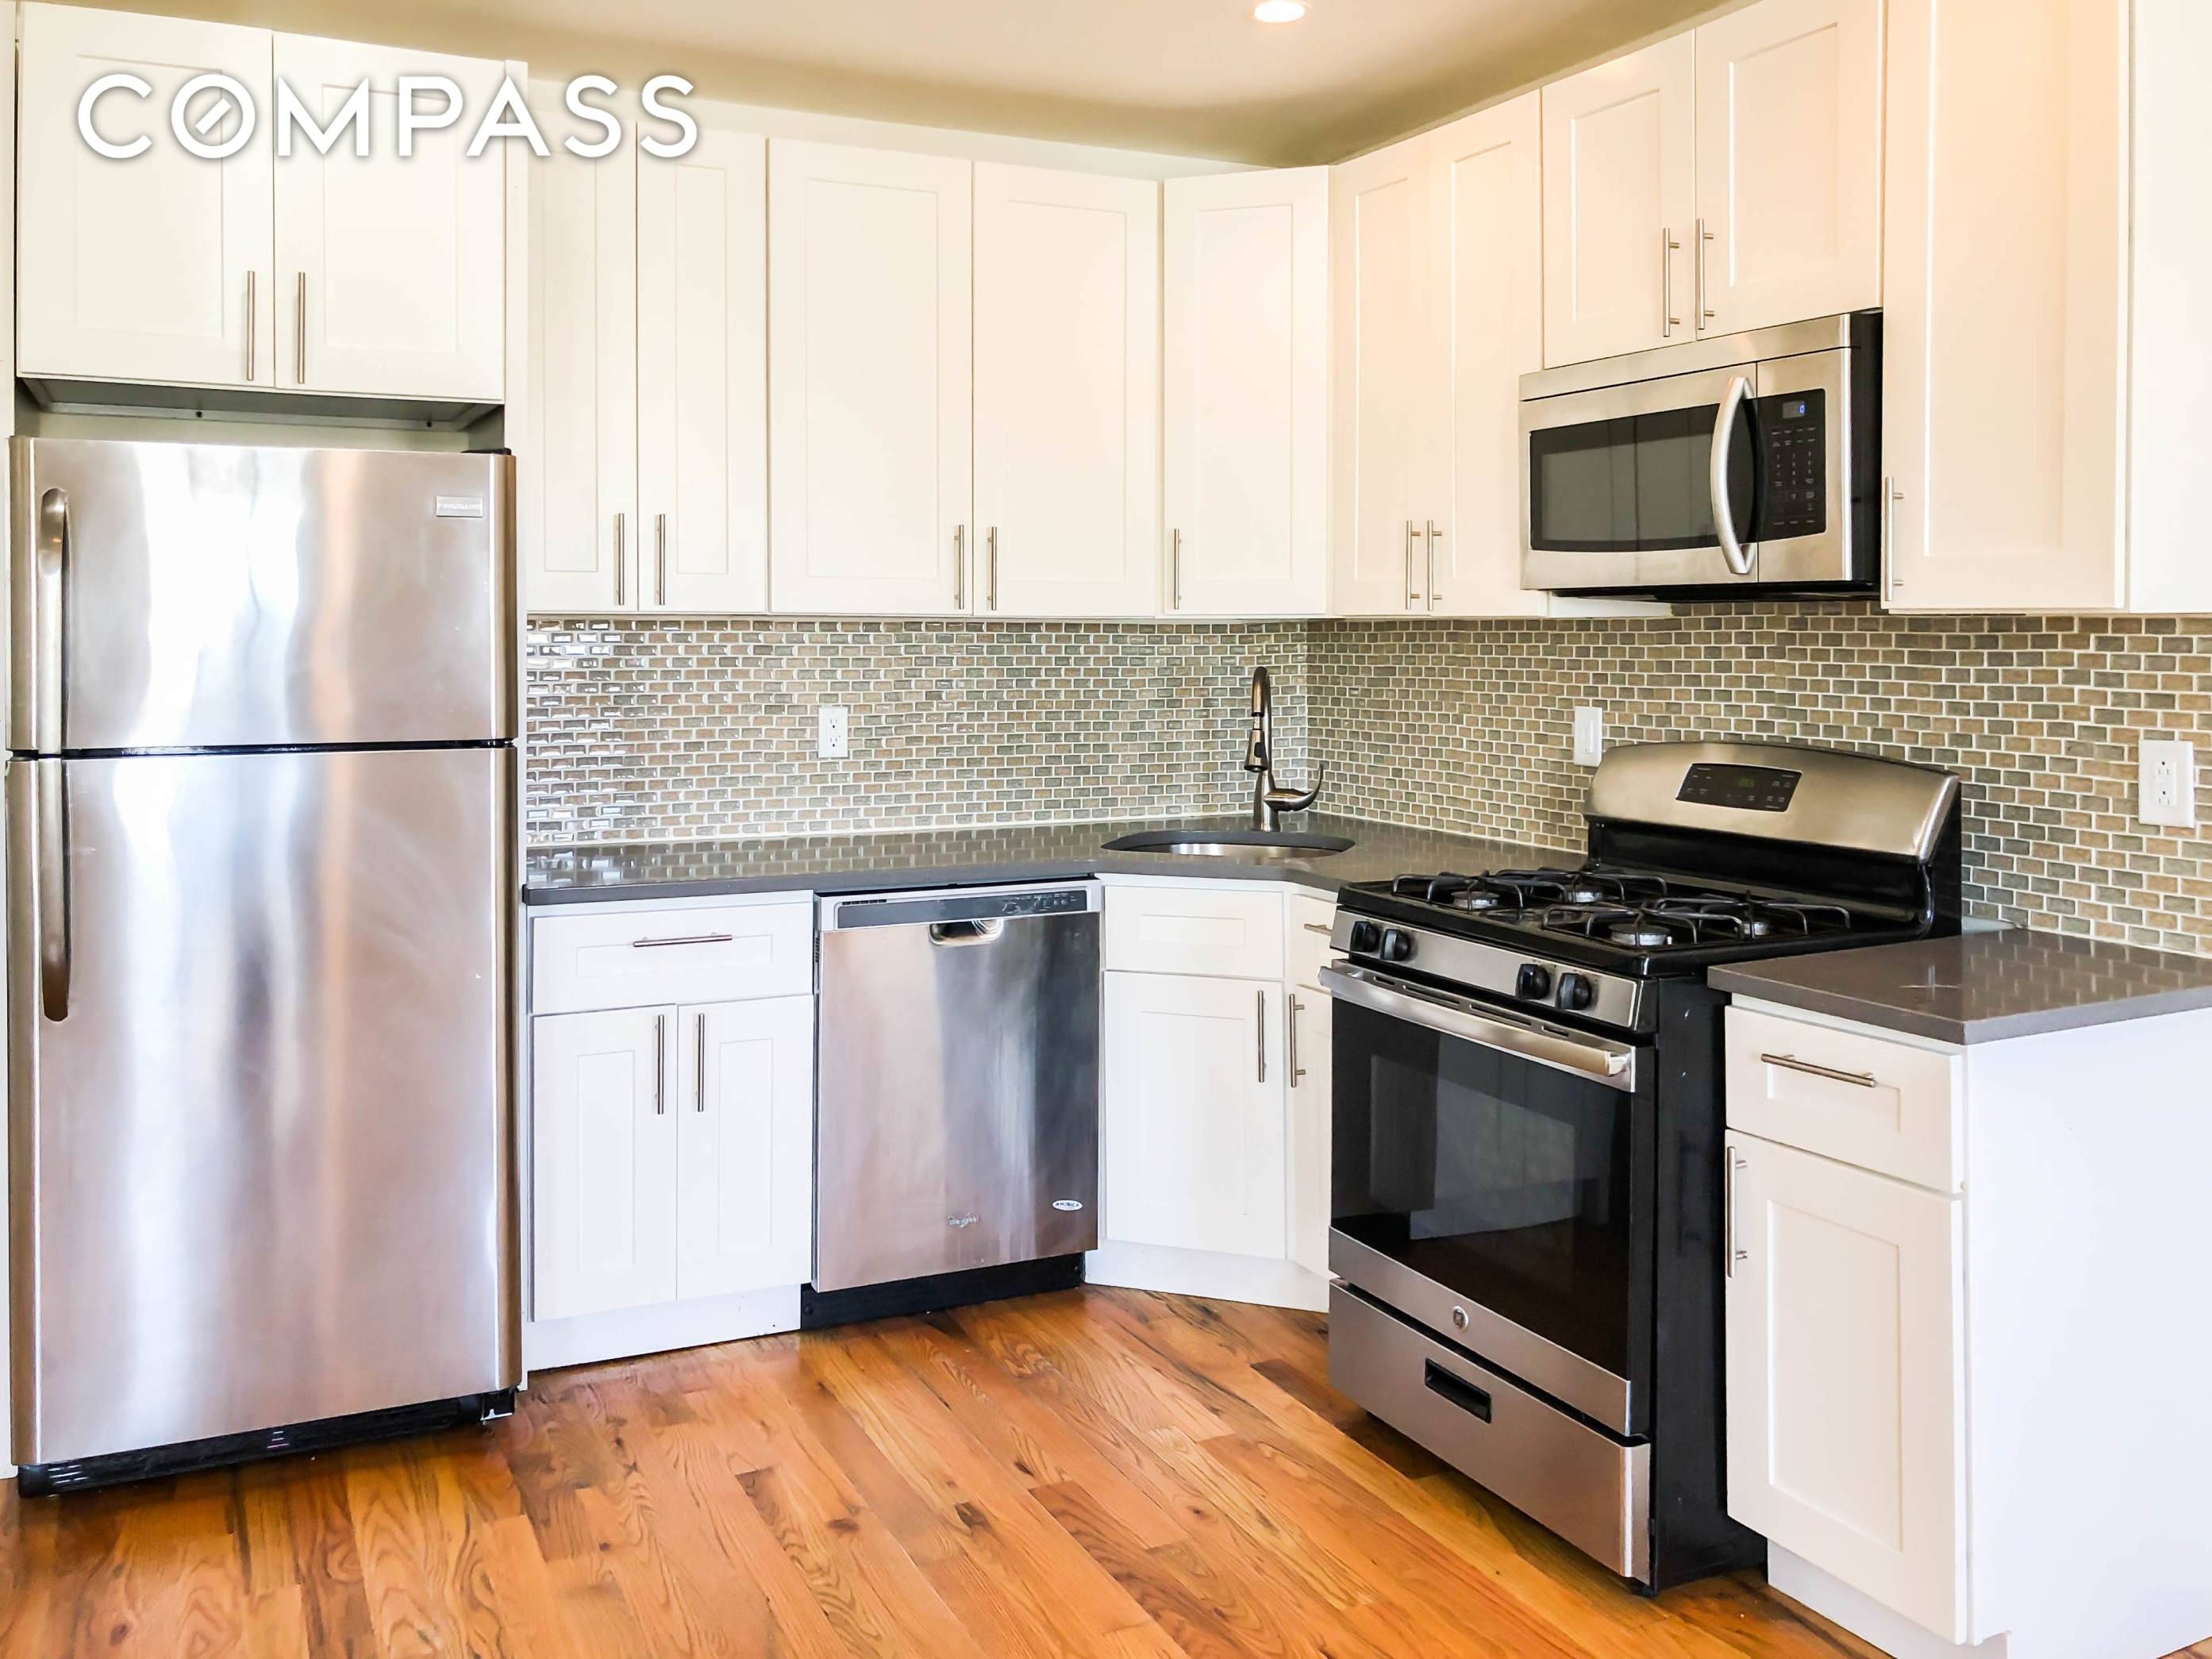 True 3 Bedroom, 2 Bathroom and massive amounts of usable, well sunlit living space will make your new Brooklyn living the most inviting destination you'll be thrilled to call home ...